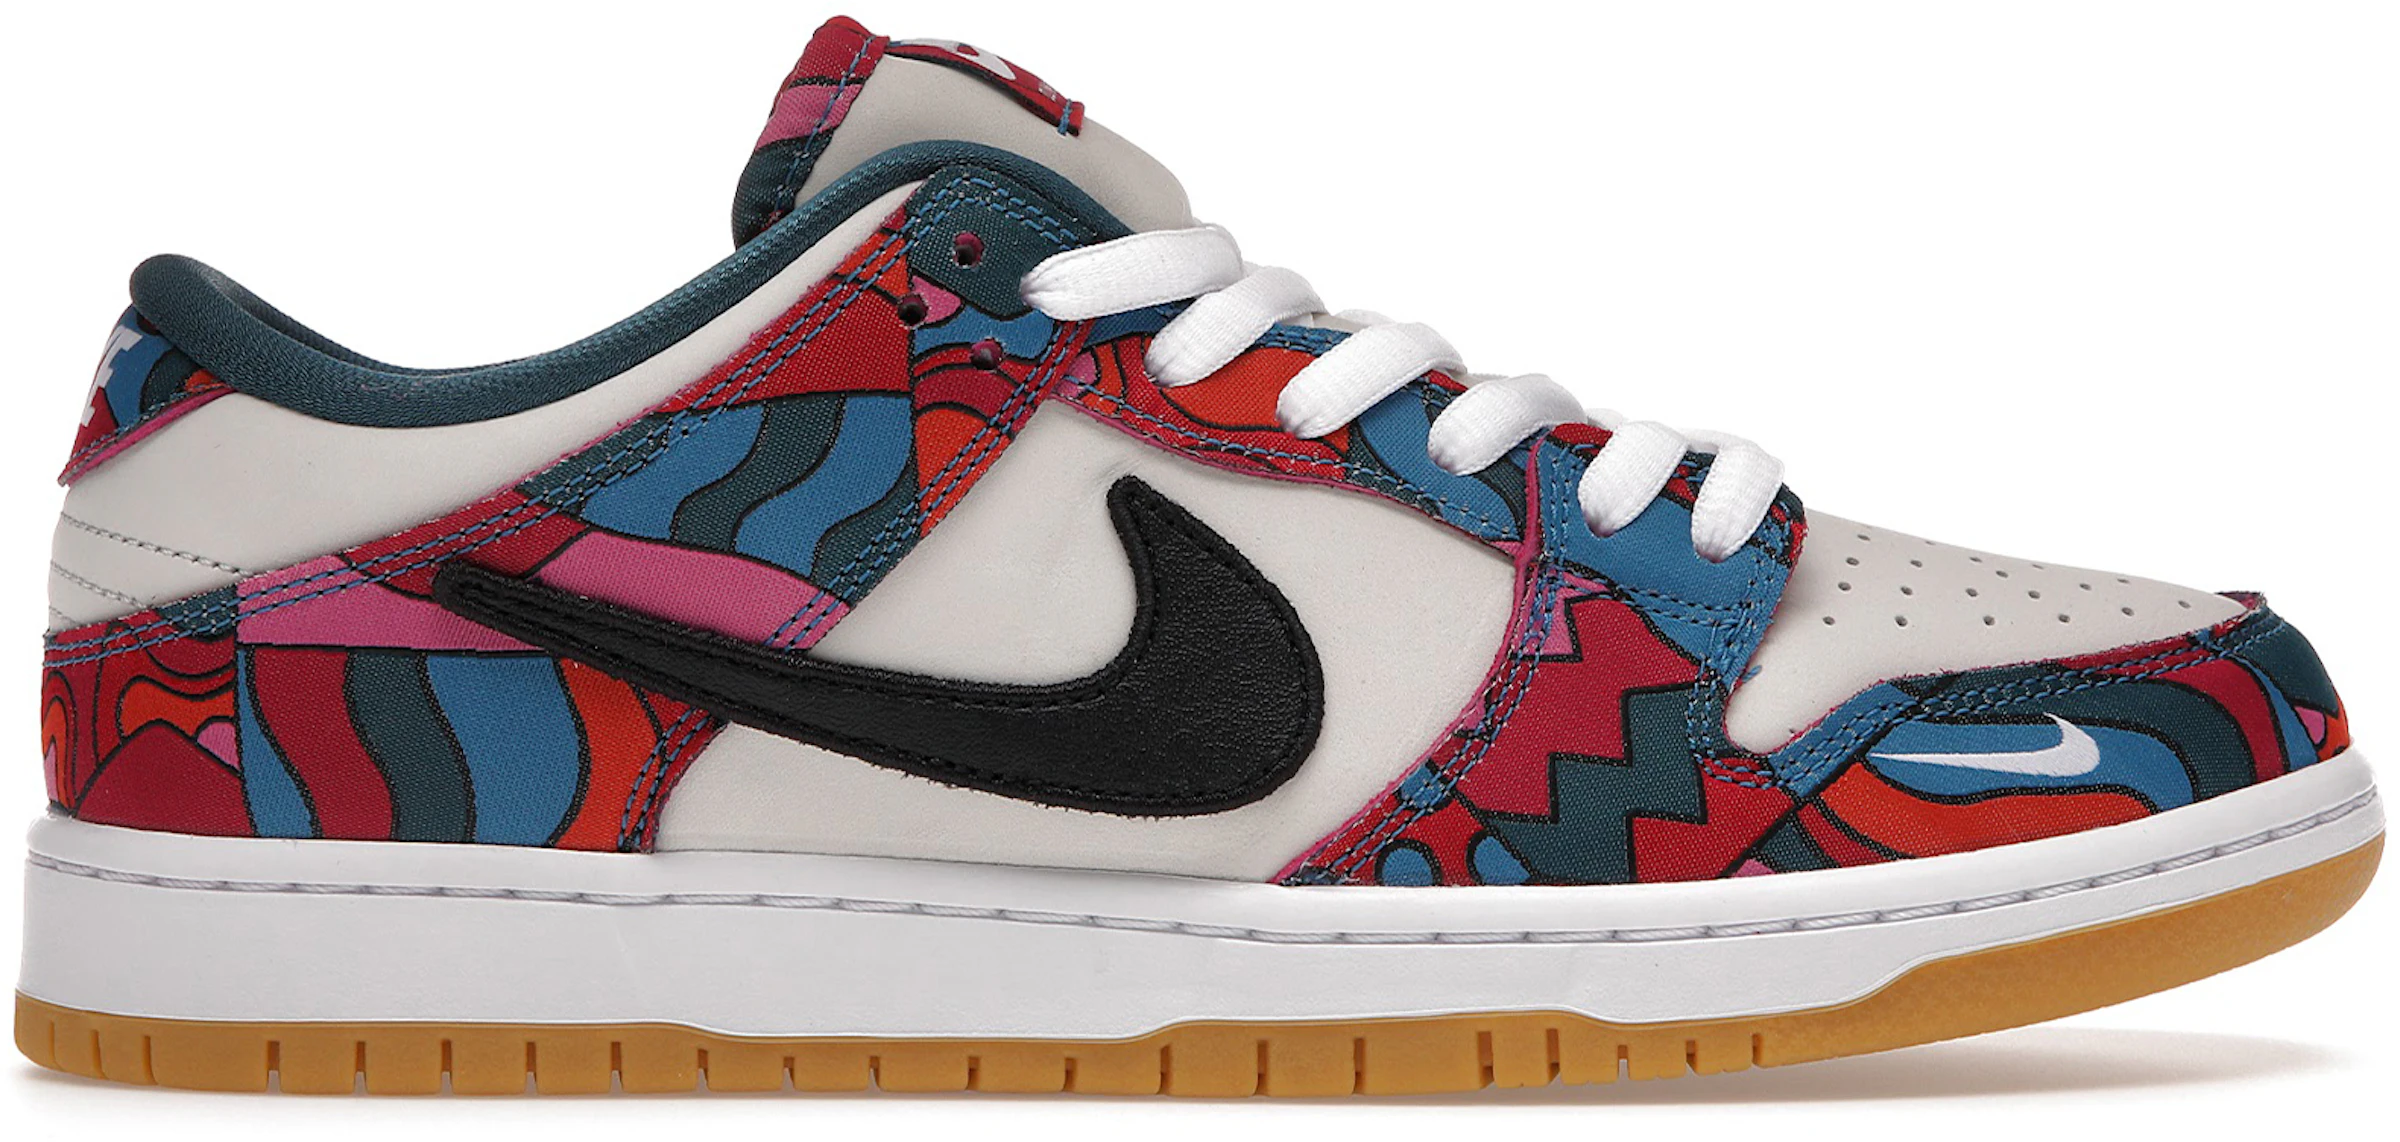 Nike SB Dunk Low Pro Parra Abstract Art (2021) - DH7695-600 - US